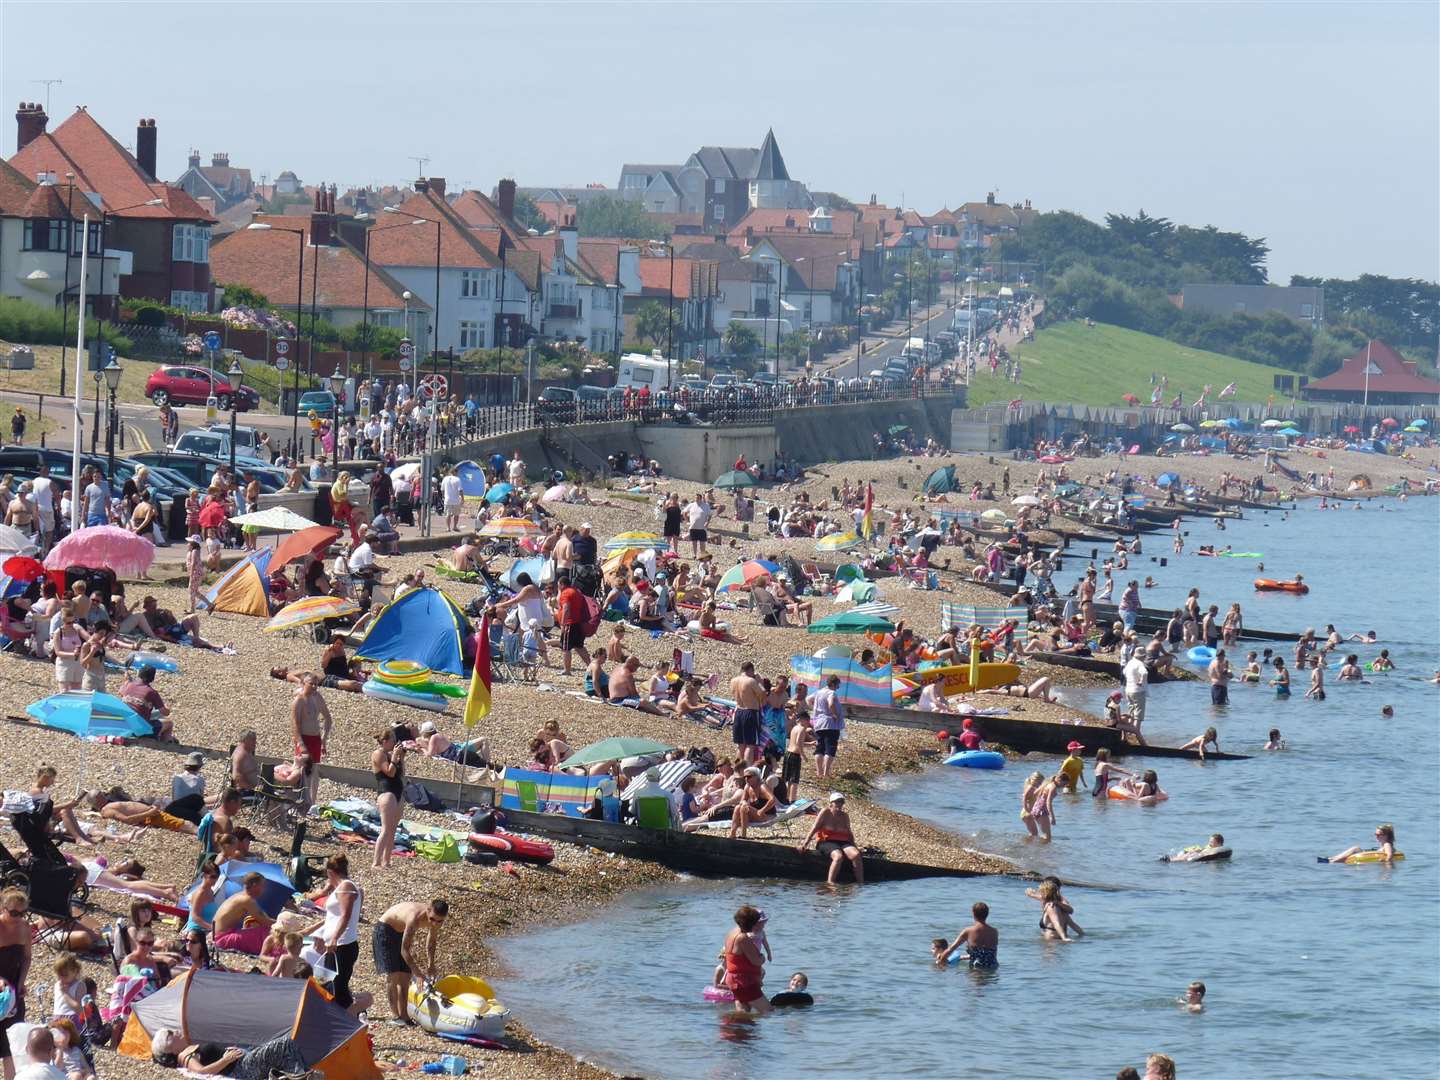 The Times describes Herne Bay as "pretty perfect" for families